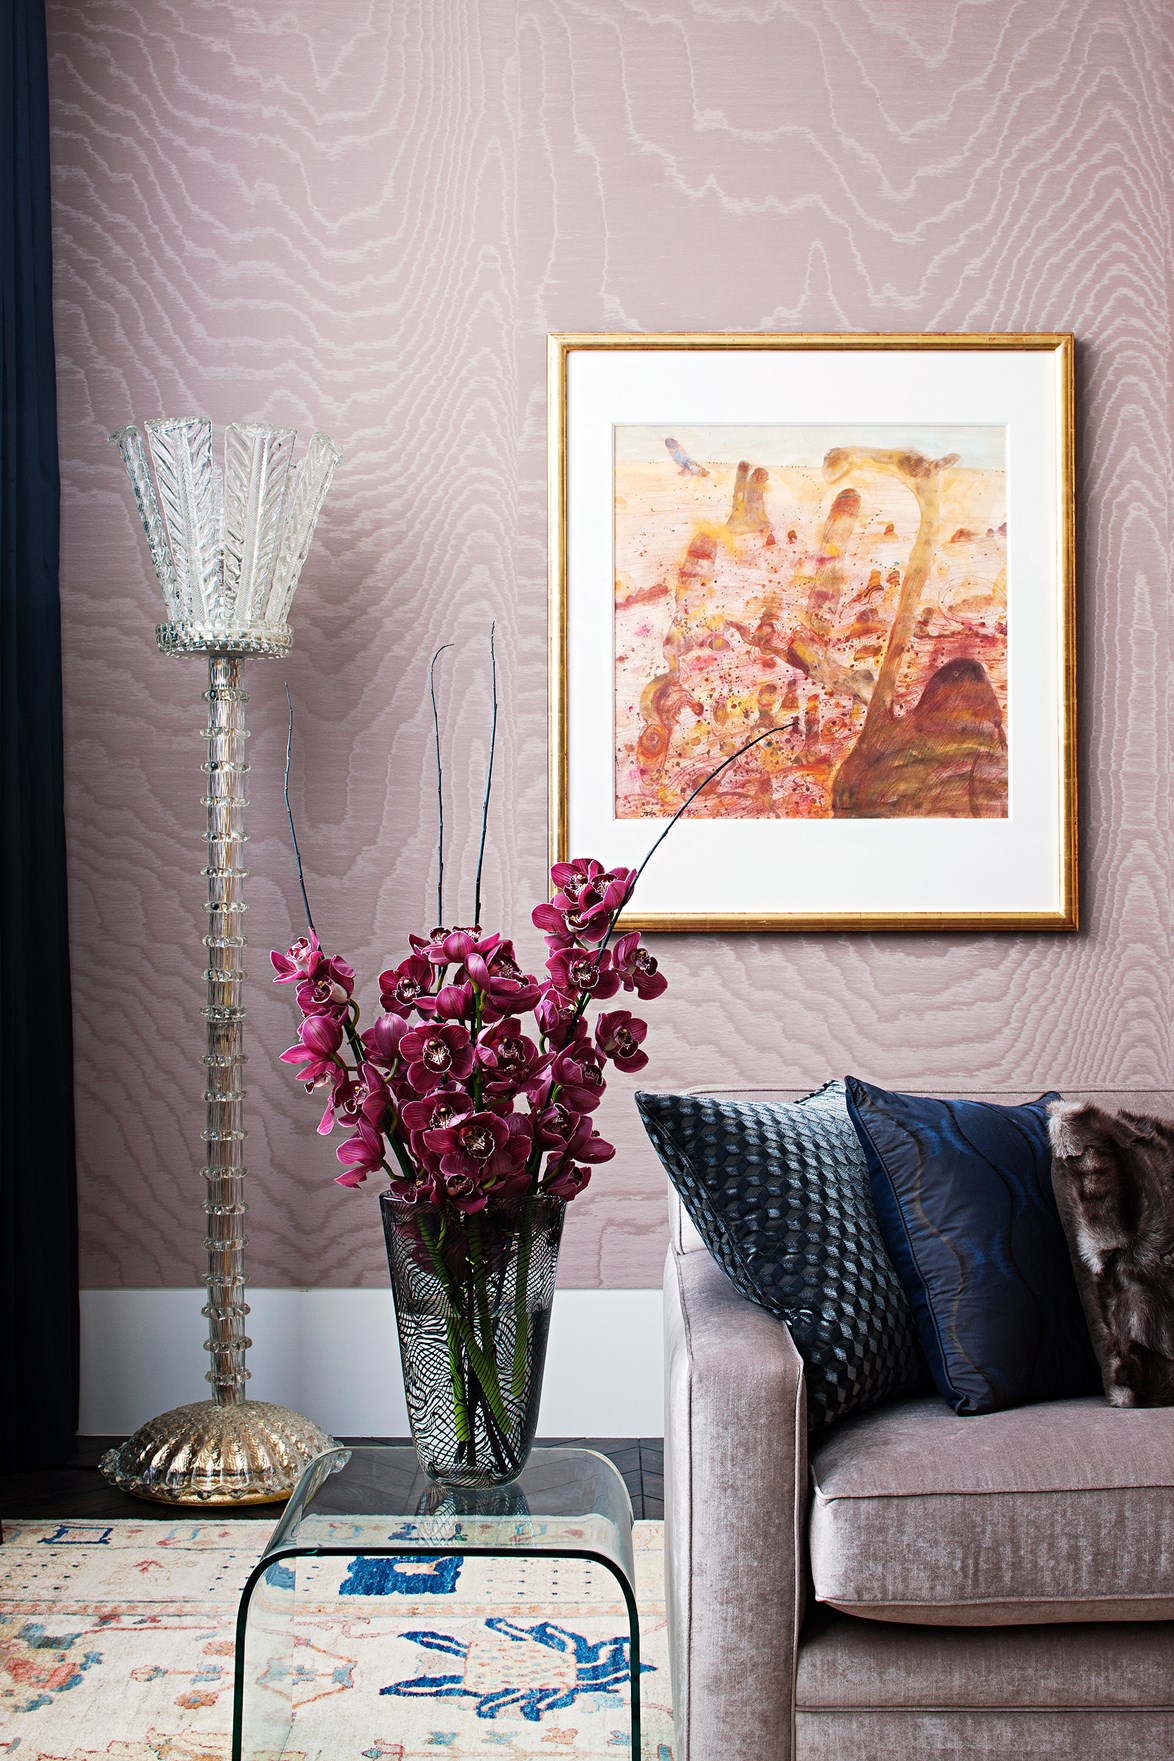 Dubbed 'Millennial pink,' the colour-of-the-moment is re-imagined in this gorgeously textured moiré wallpaper in this  [luxurious Melbourne penthouse](http://www.homestolove.com.au/melbourne-penthouse-reminiscent-of-beautiful-old-hotel-4622). *Photo: Shannon McGrath / Belle*